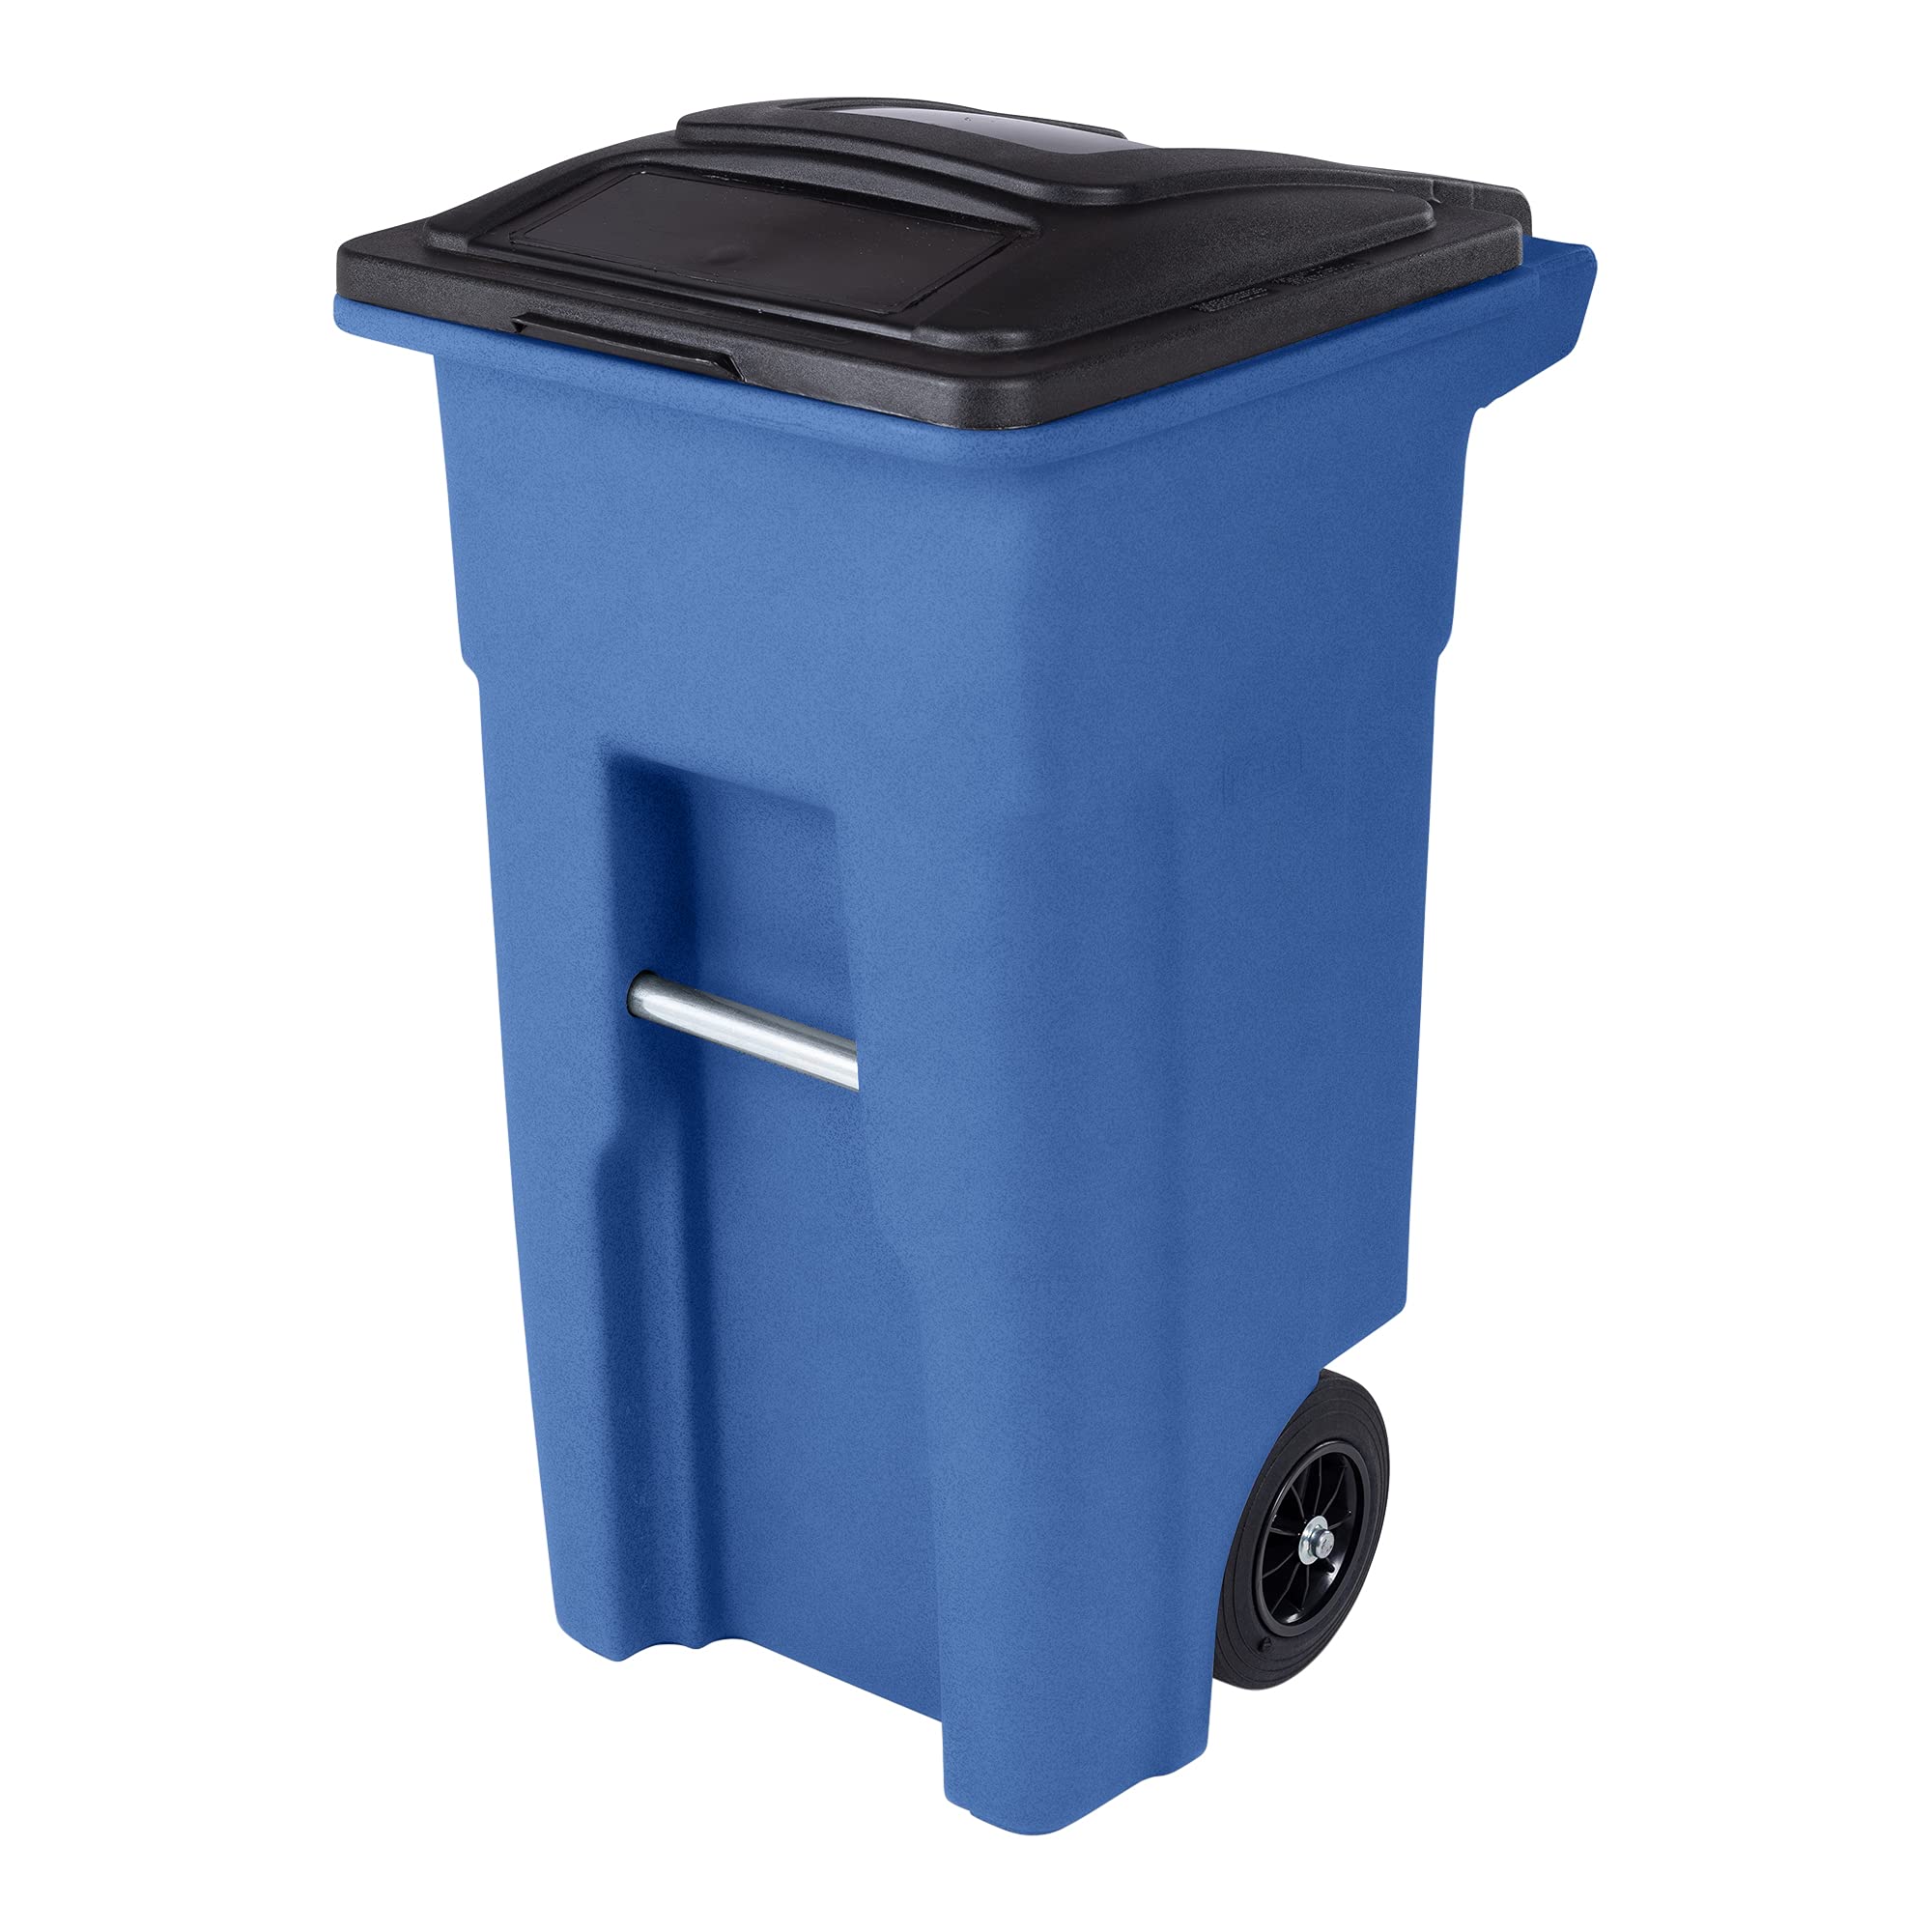 Toter 32 Gal. Blue Trash Can with Quiet Wheels and Atta...